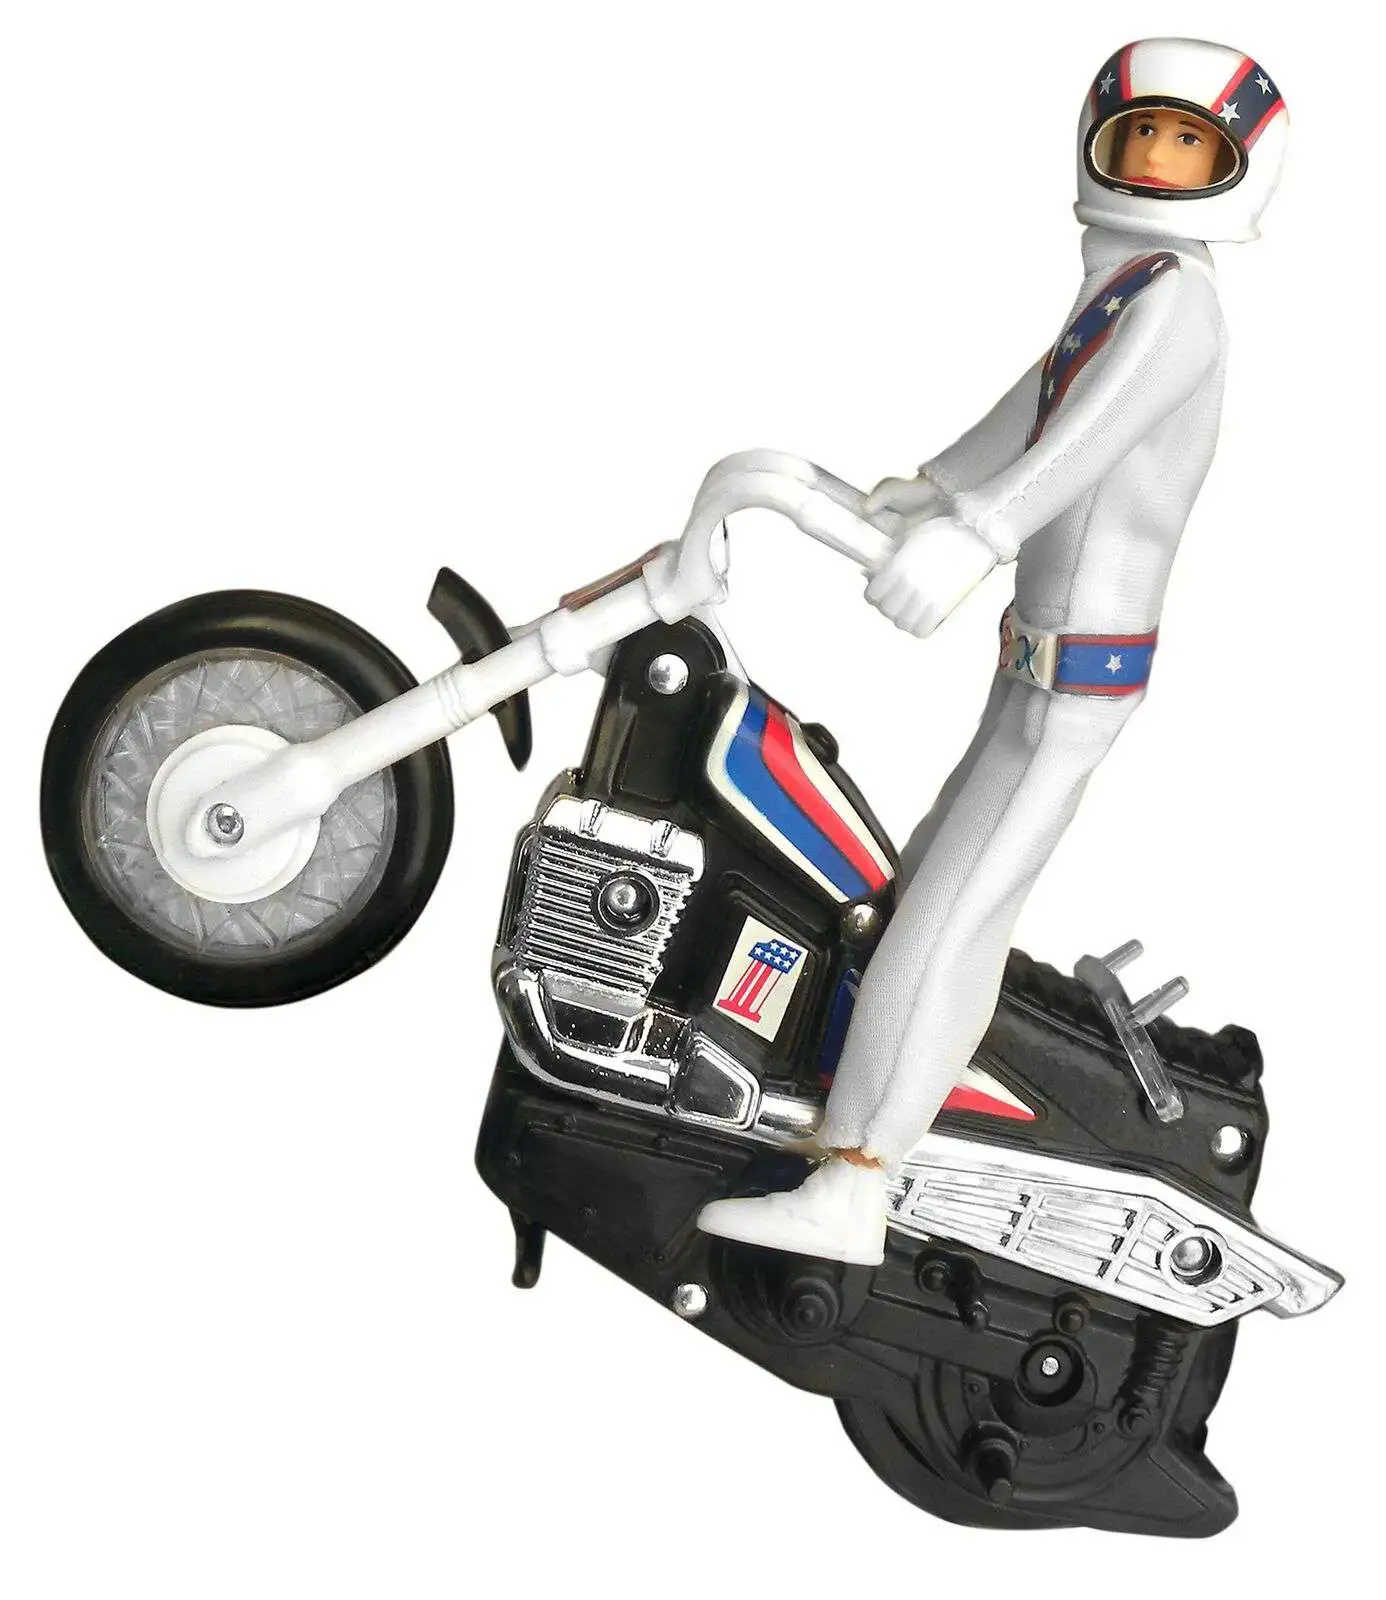 Evel Knievel Stunt Cycle 2020 Release From California Creations 